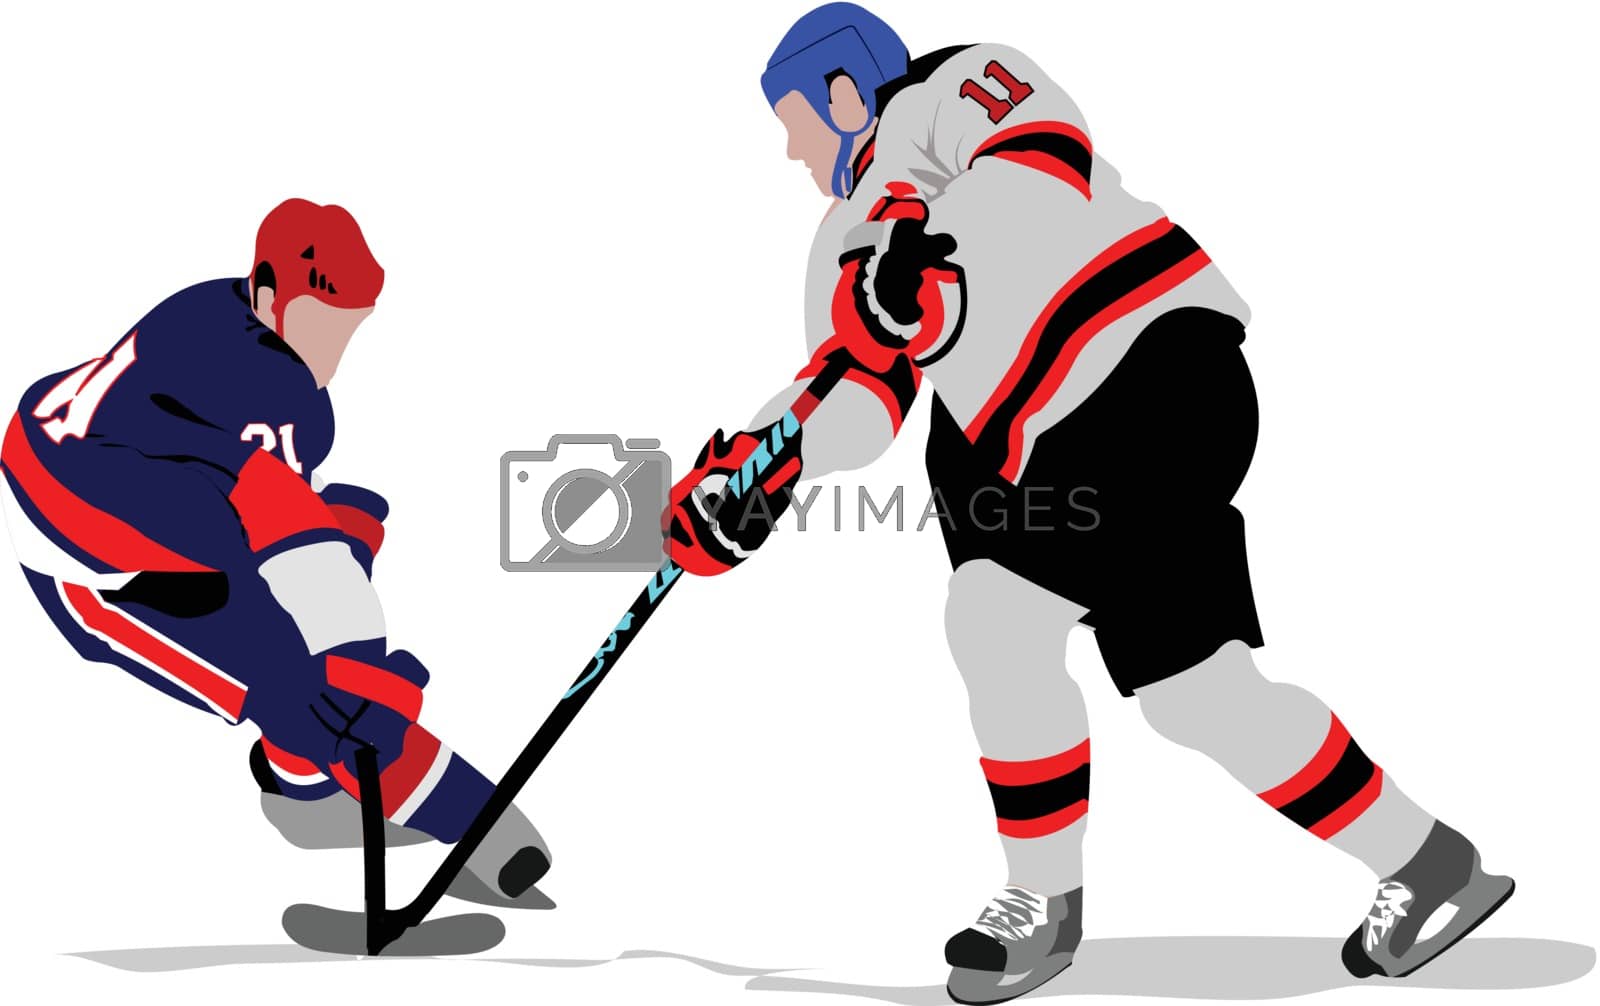 Royalty free image of Ice hockey players. Colored Vector illustration for designers by leonido